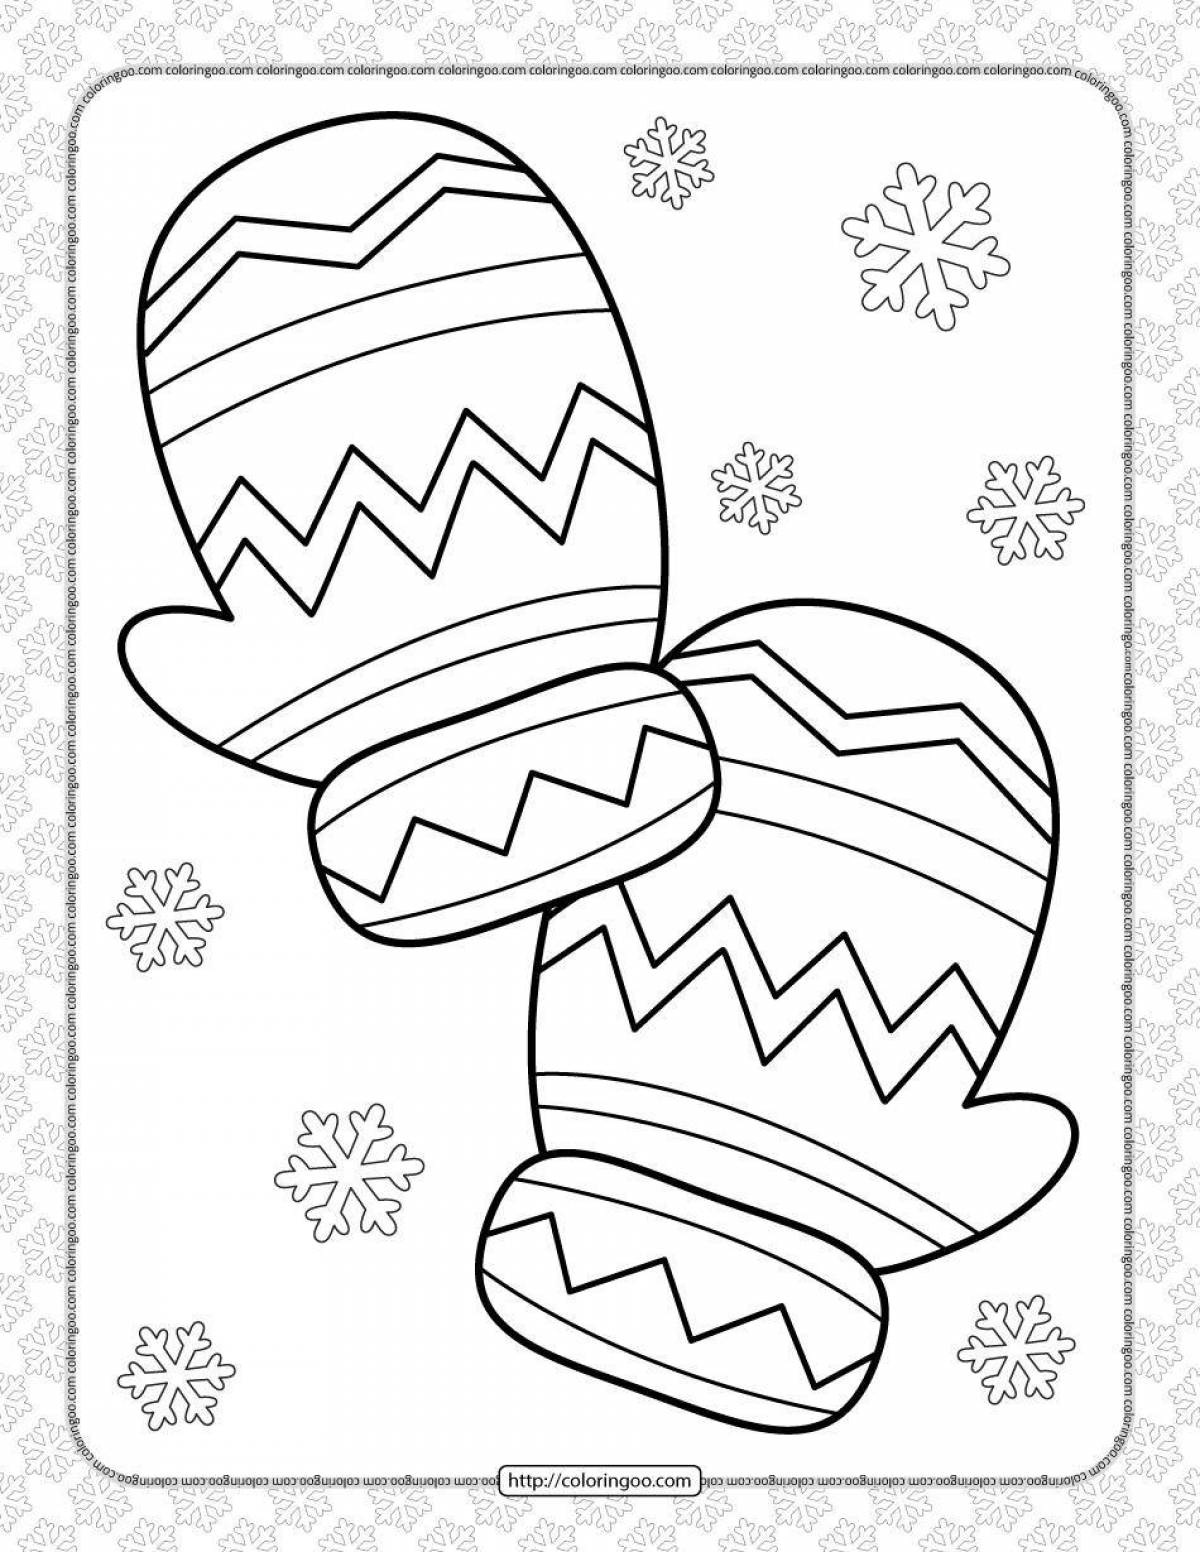 Sparkling mittens coloring book for children 3-4 years old